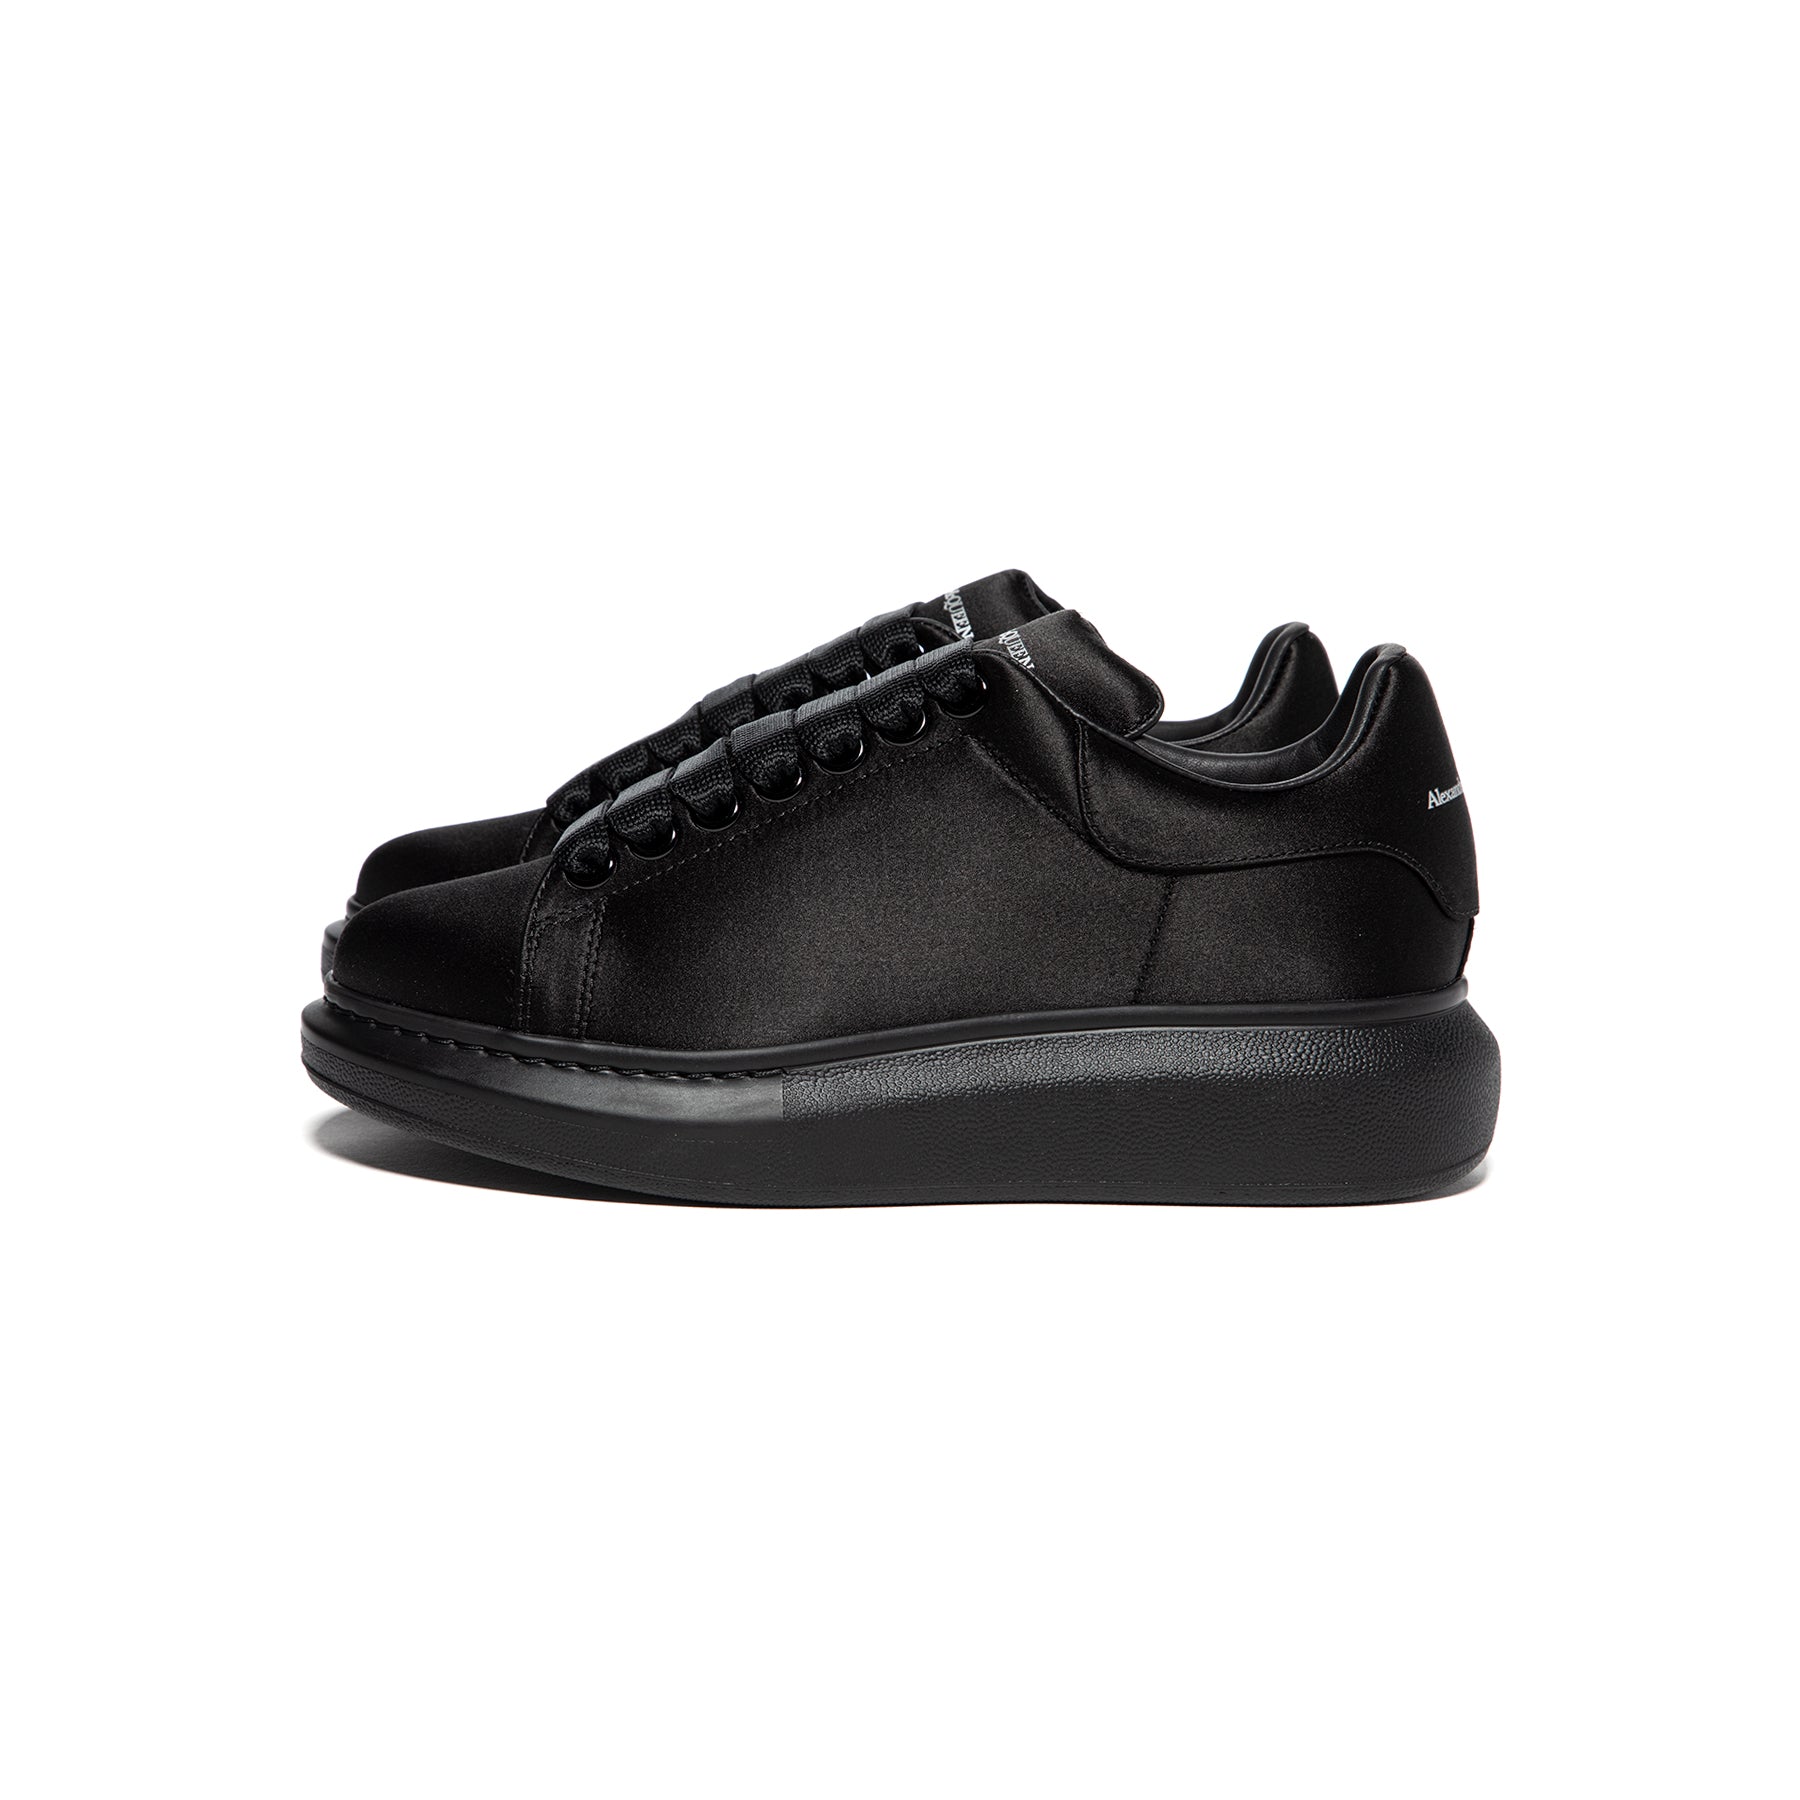 I'm Obsessed With the Alexander McQueen Oversize Sneaker